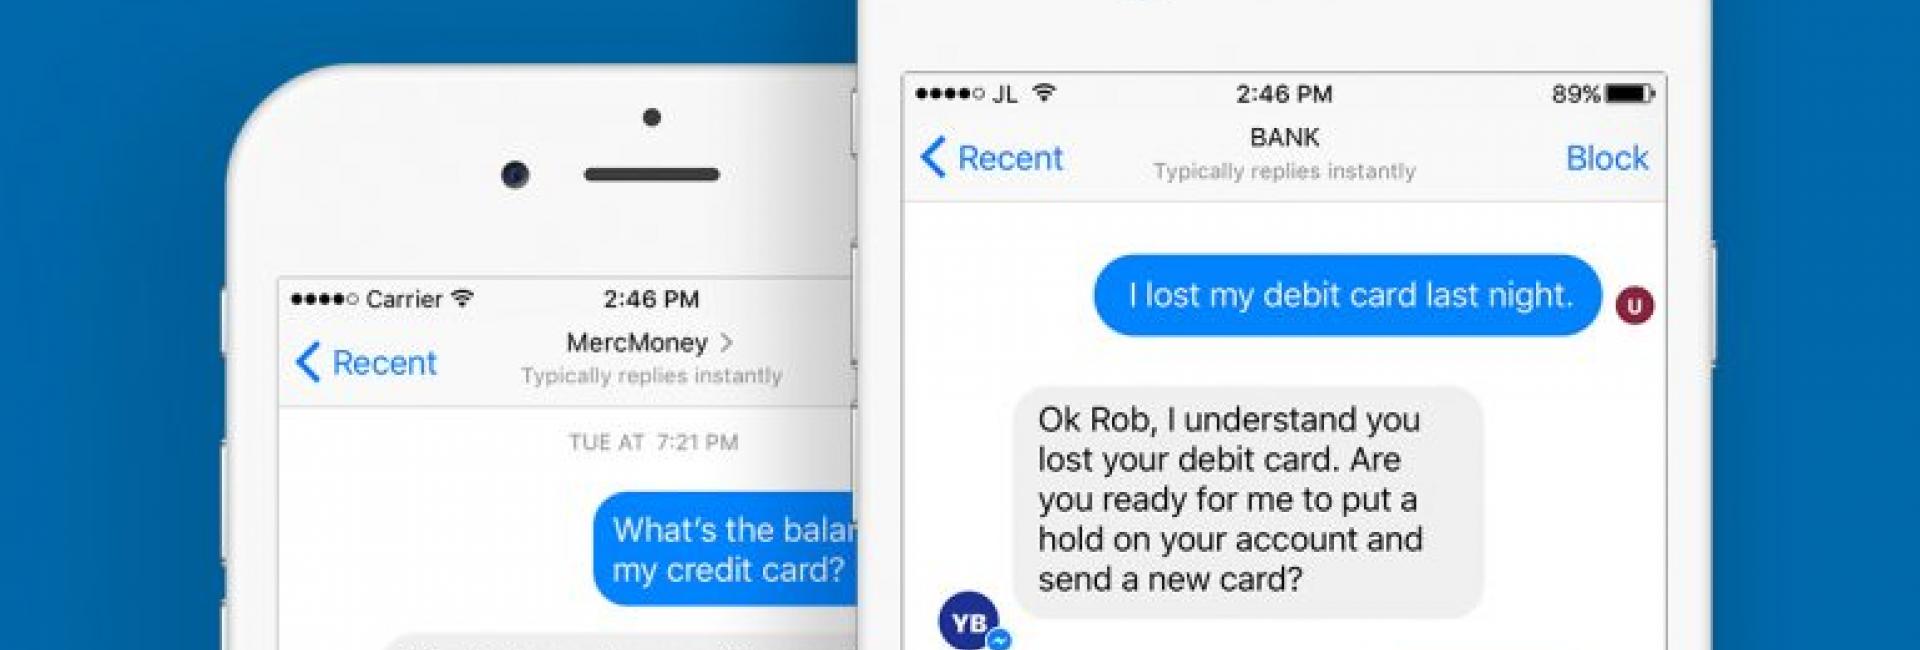 Chatbots-in-Banking-1-770x450